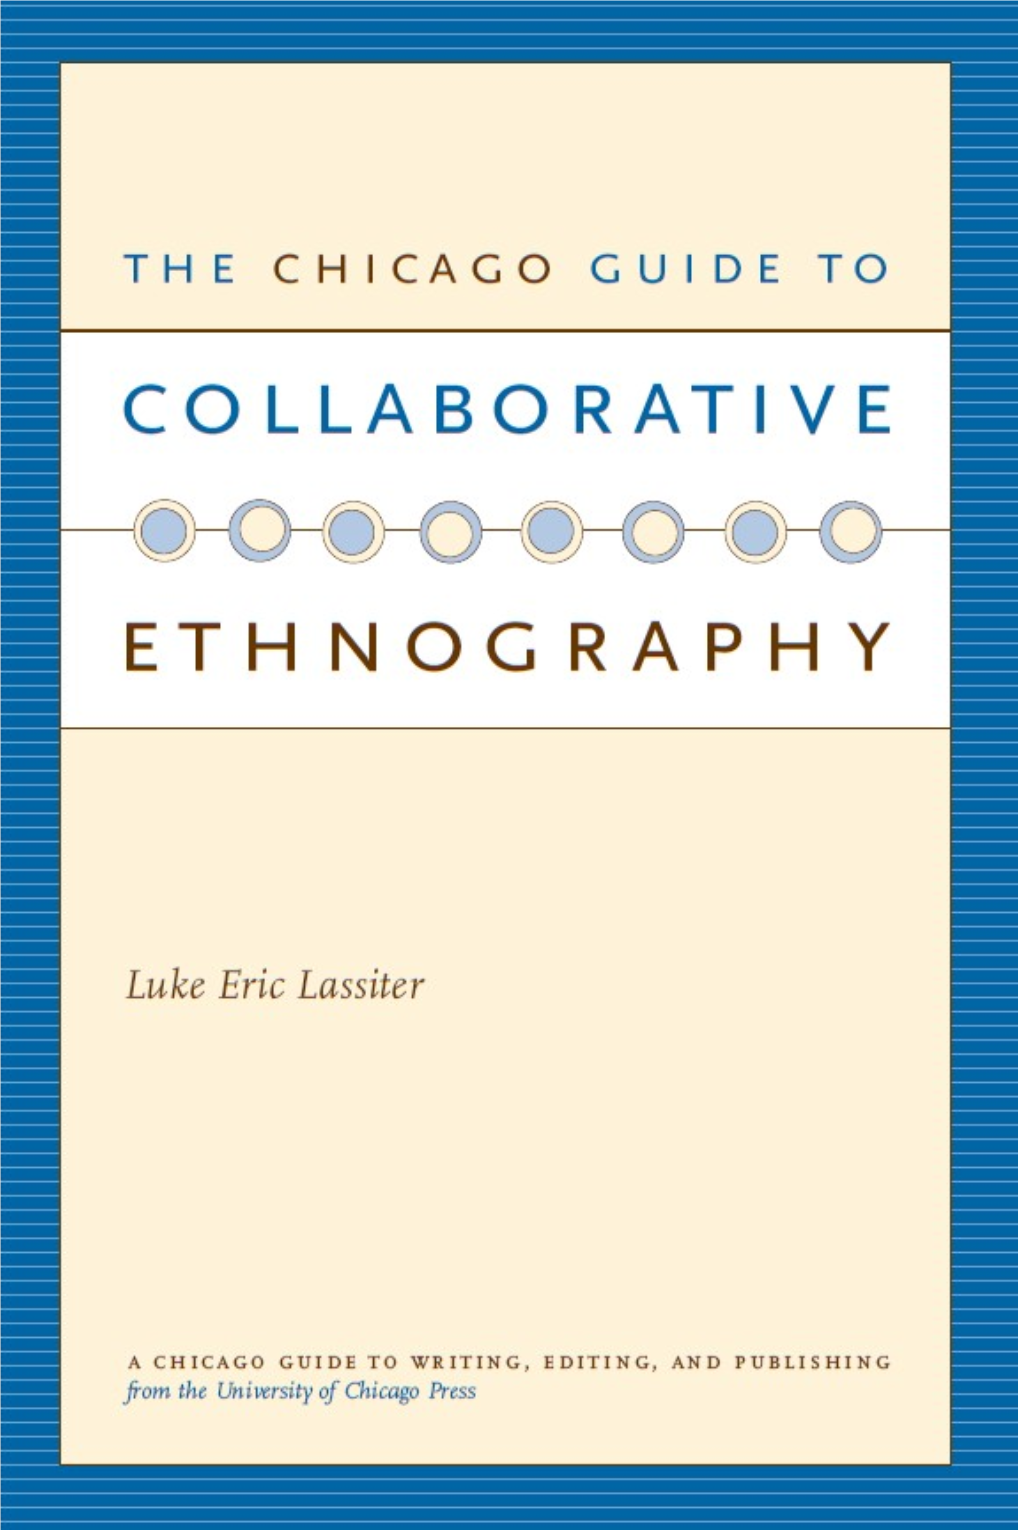 The Chicago Guide to Collaborative Ethnography on Writing, Editing, and Publishing How to Write a BA Thesis Jacques Barzun Charles Lipson